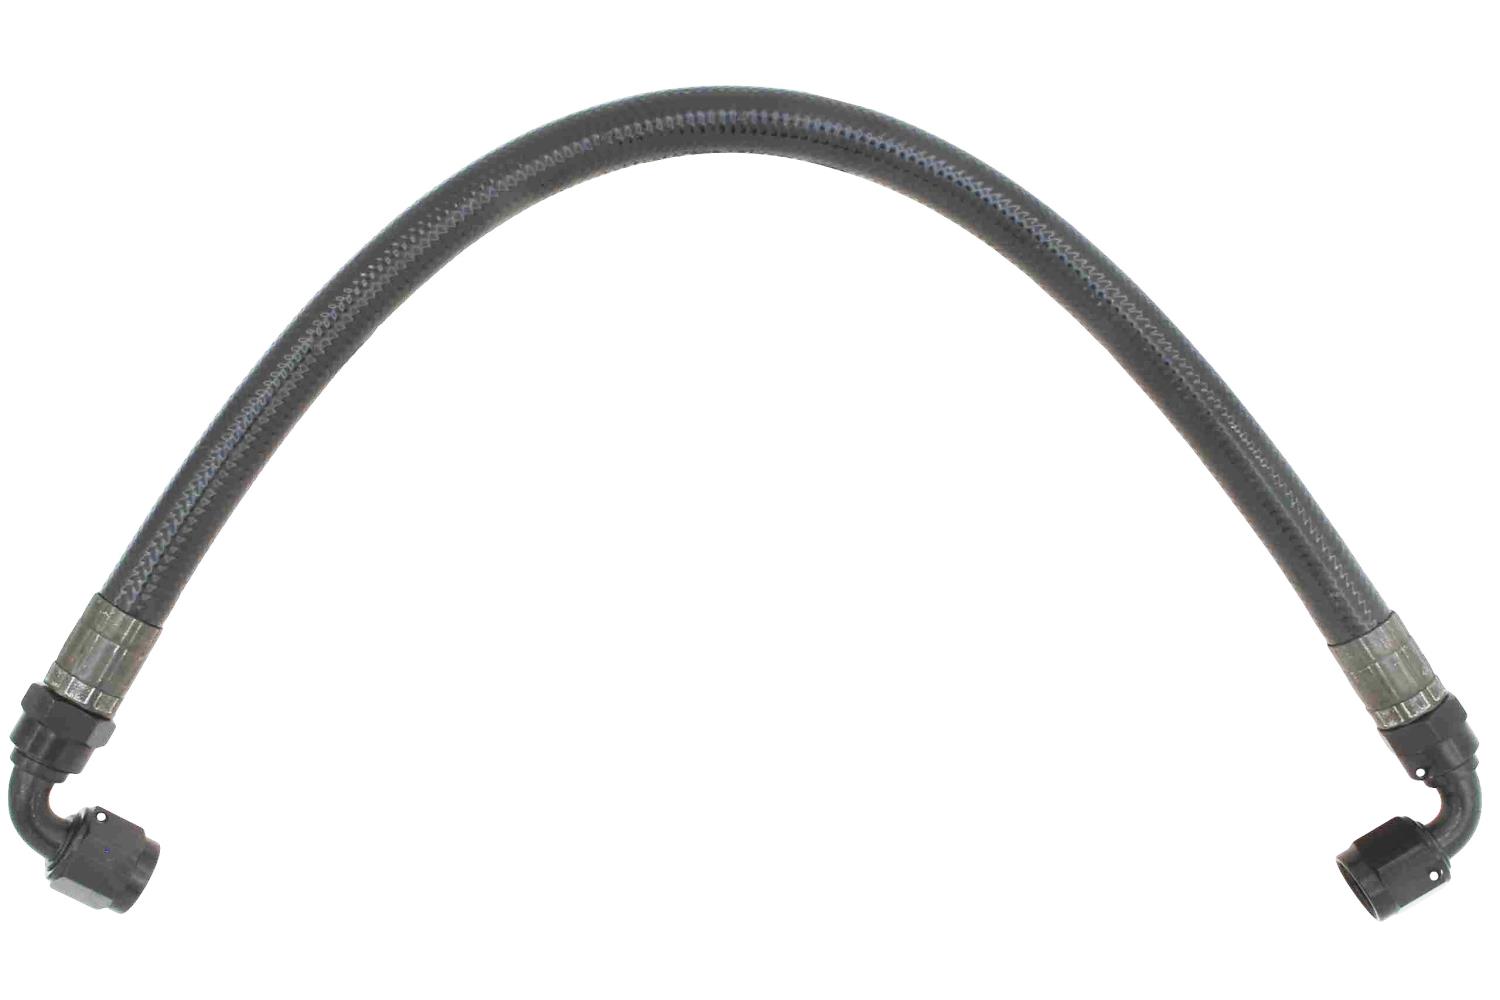 ICT Billet 551082-HPH18: Universal Power Steering Hose Assembly, High-Pressure, Working Pressure Rating: 2500 PSI, Fitting Size: -6AN  Female, Fitting Angle: 90-Degree, Length: 18 in., PTFE Braided Hose